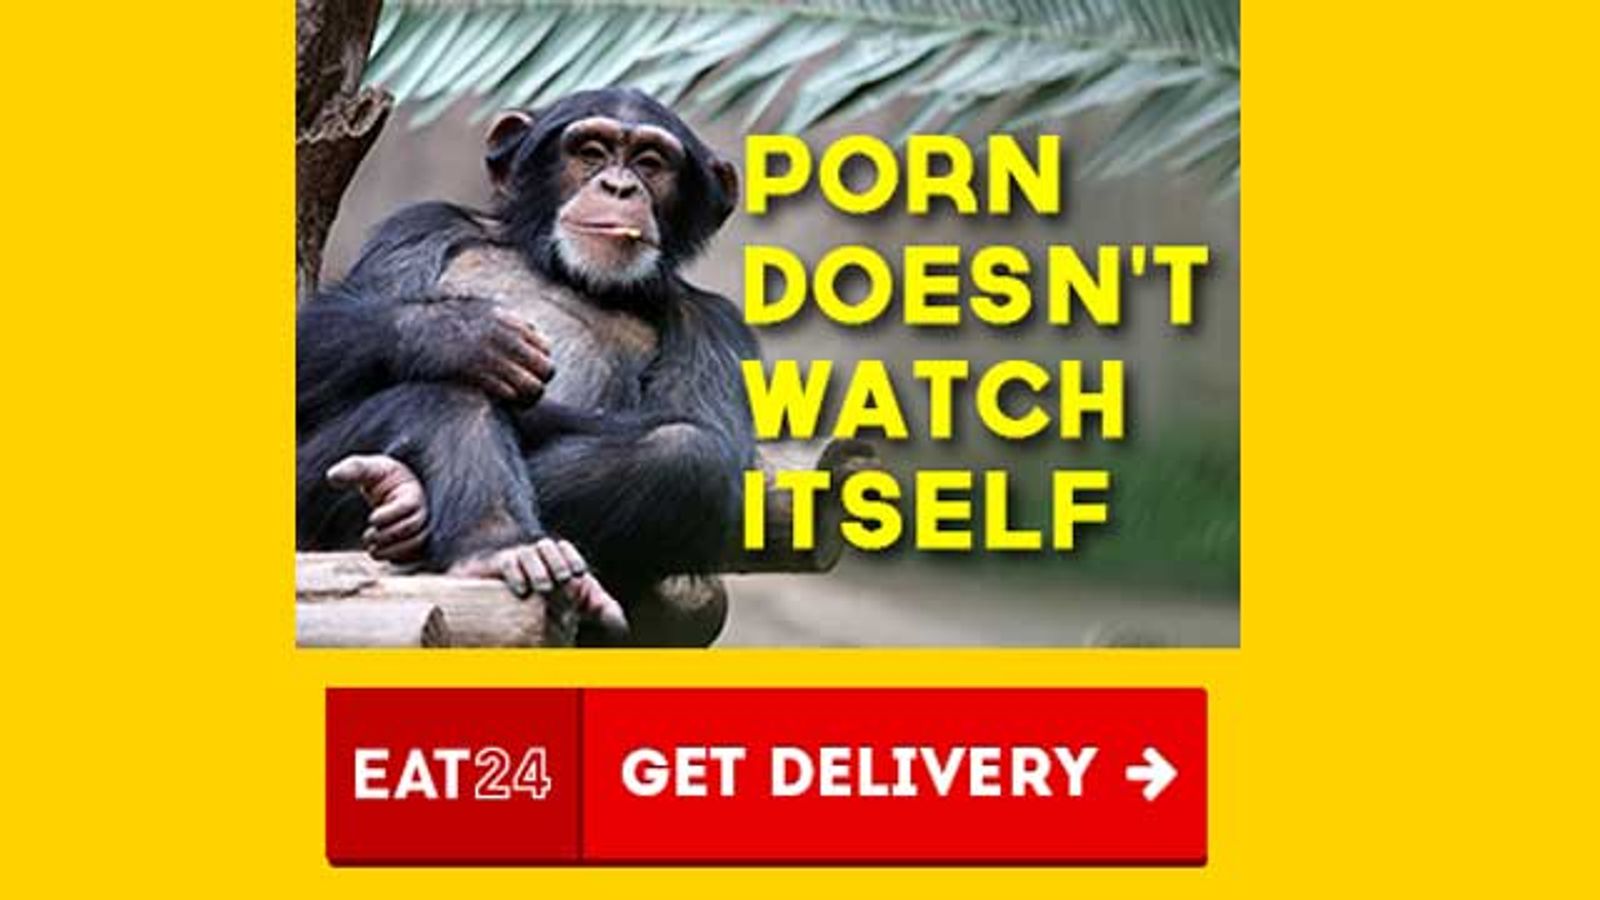 Eat24: Every Porn Star’s Real Best Friend